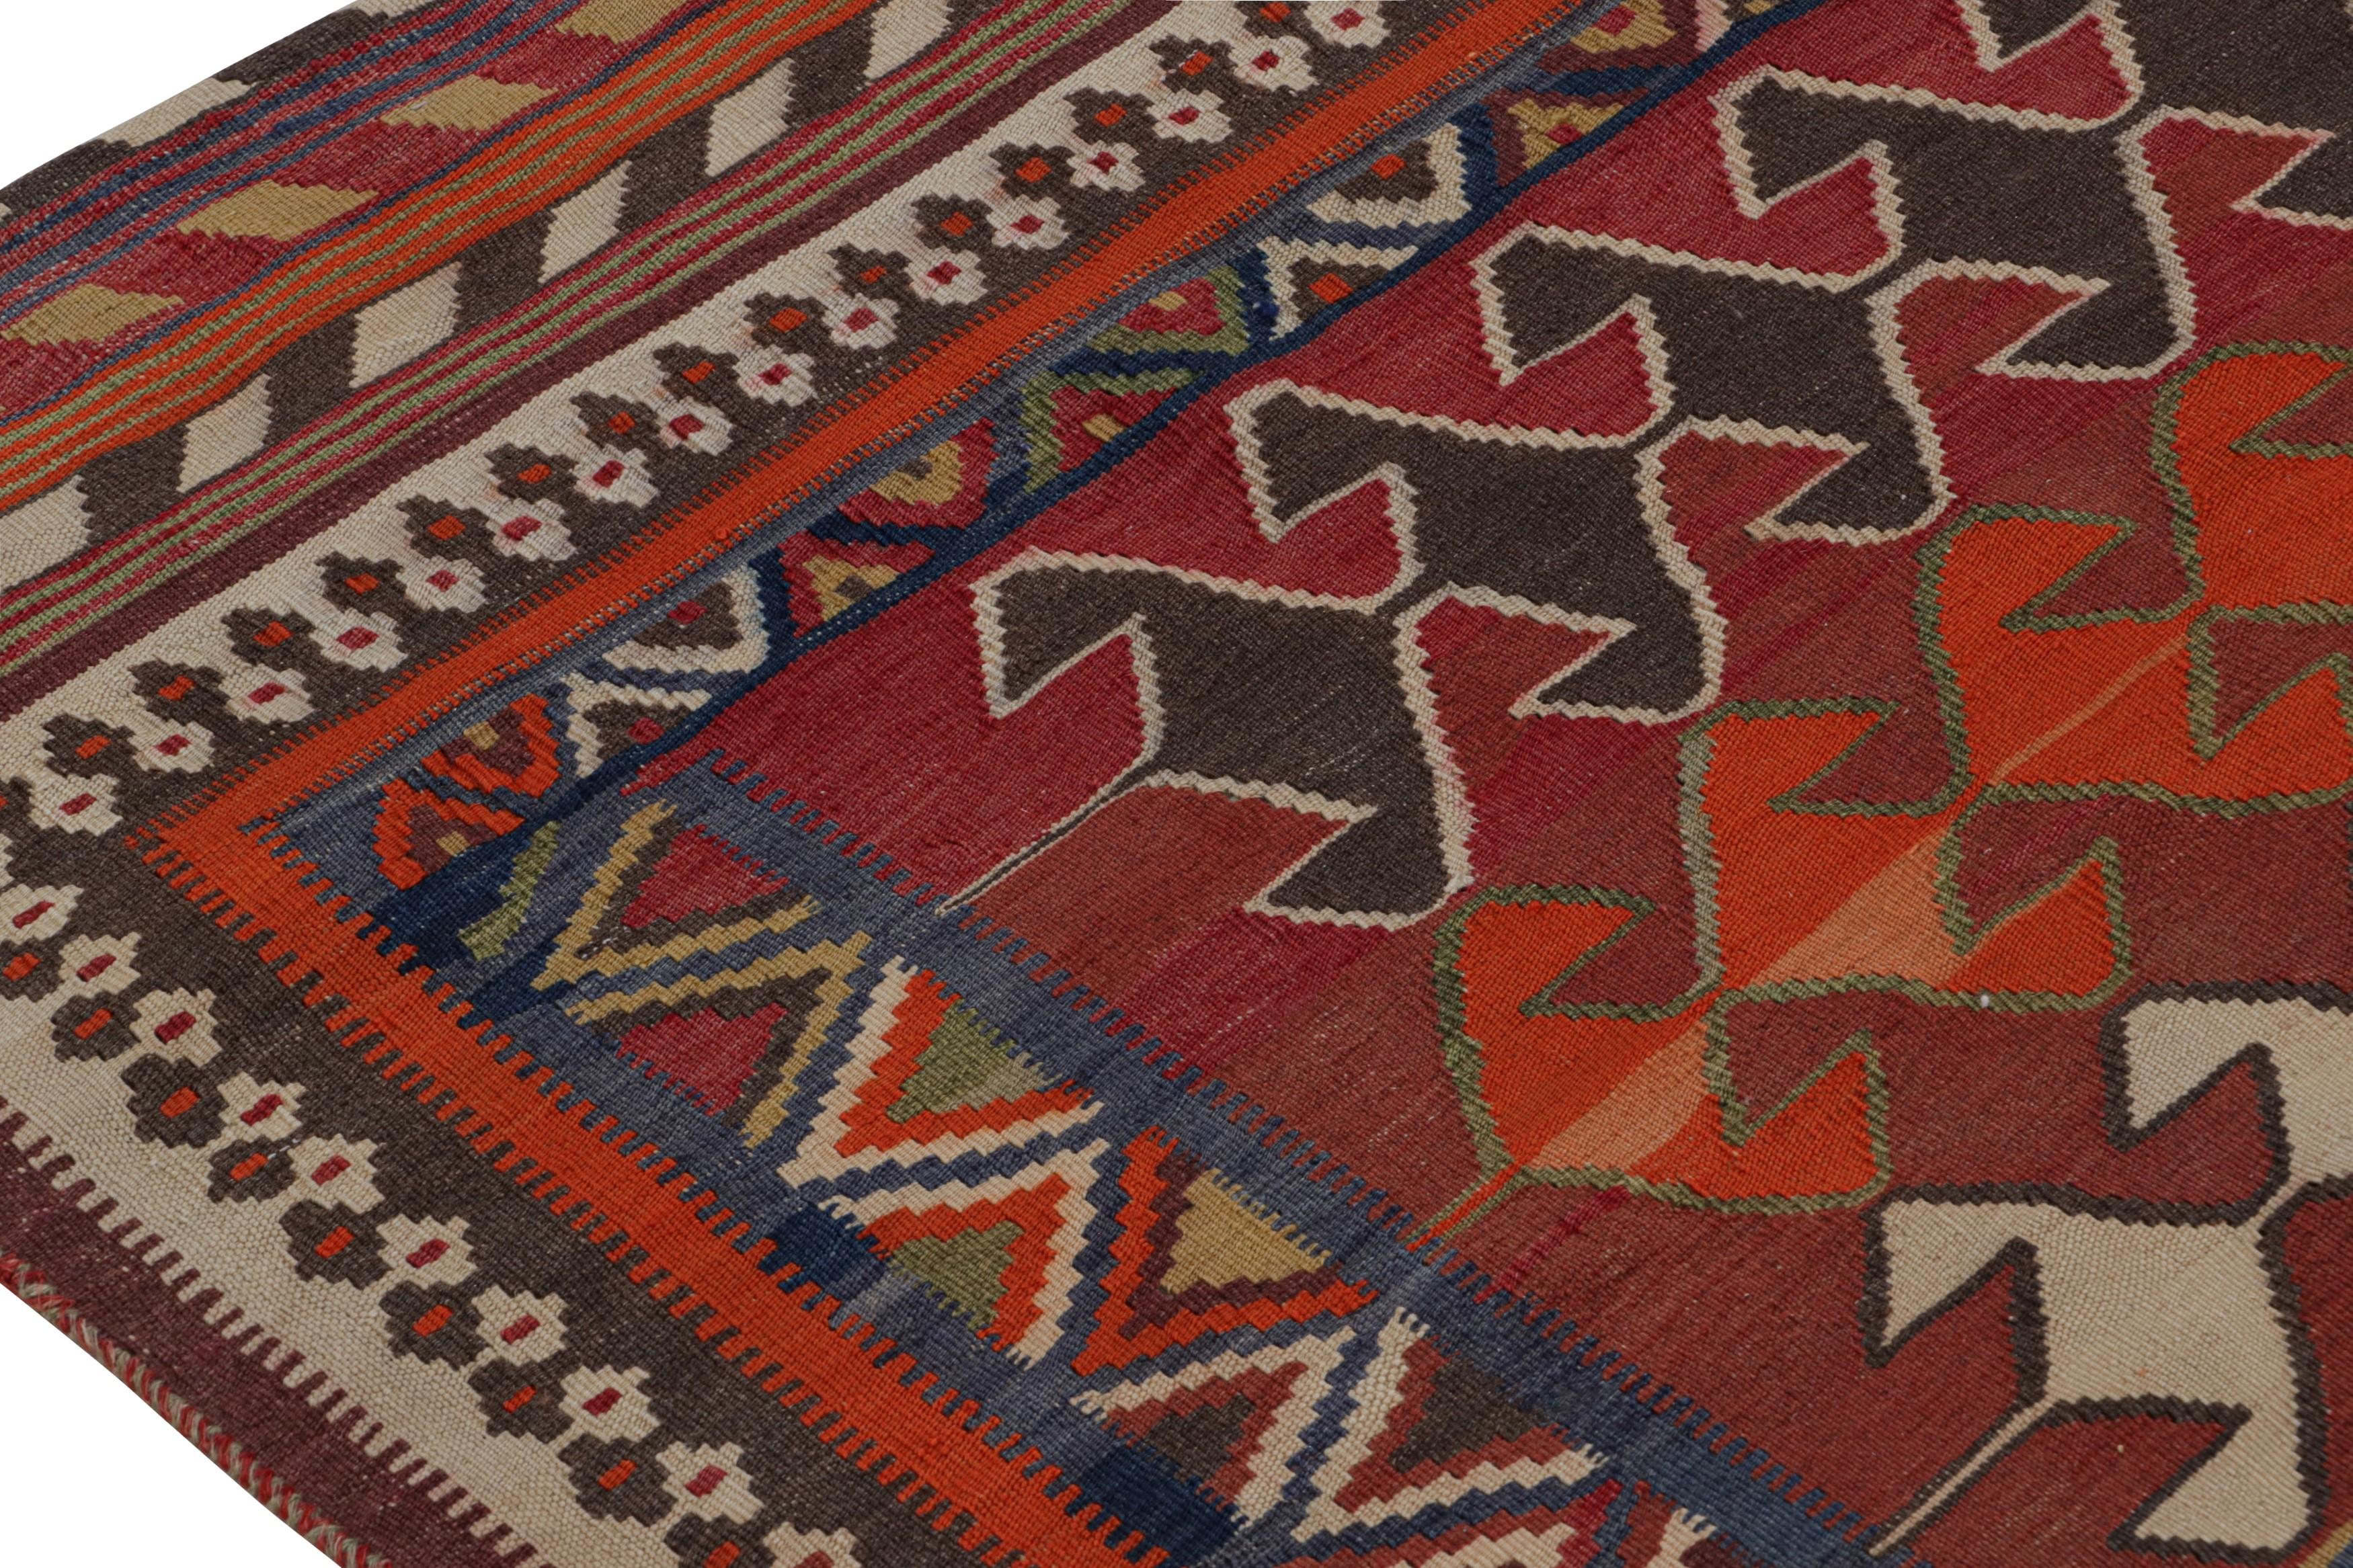 Vintage Afghani tribal Kilim rug, with Geometric Patterns, from Rug & Kilim In Good Condition For Sale In Long Island City, NY